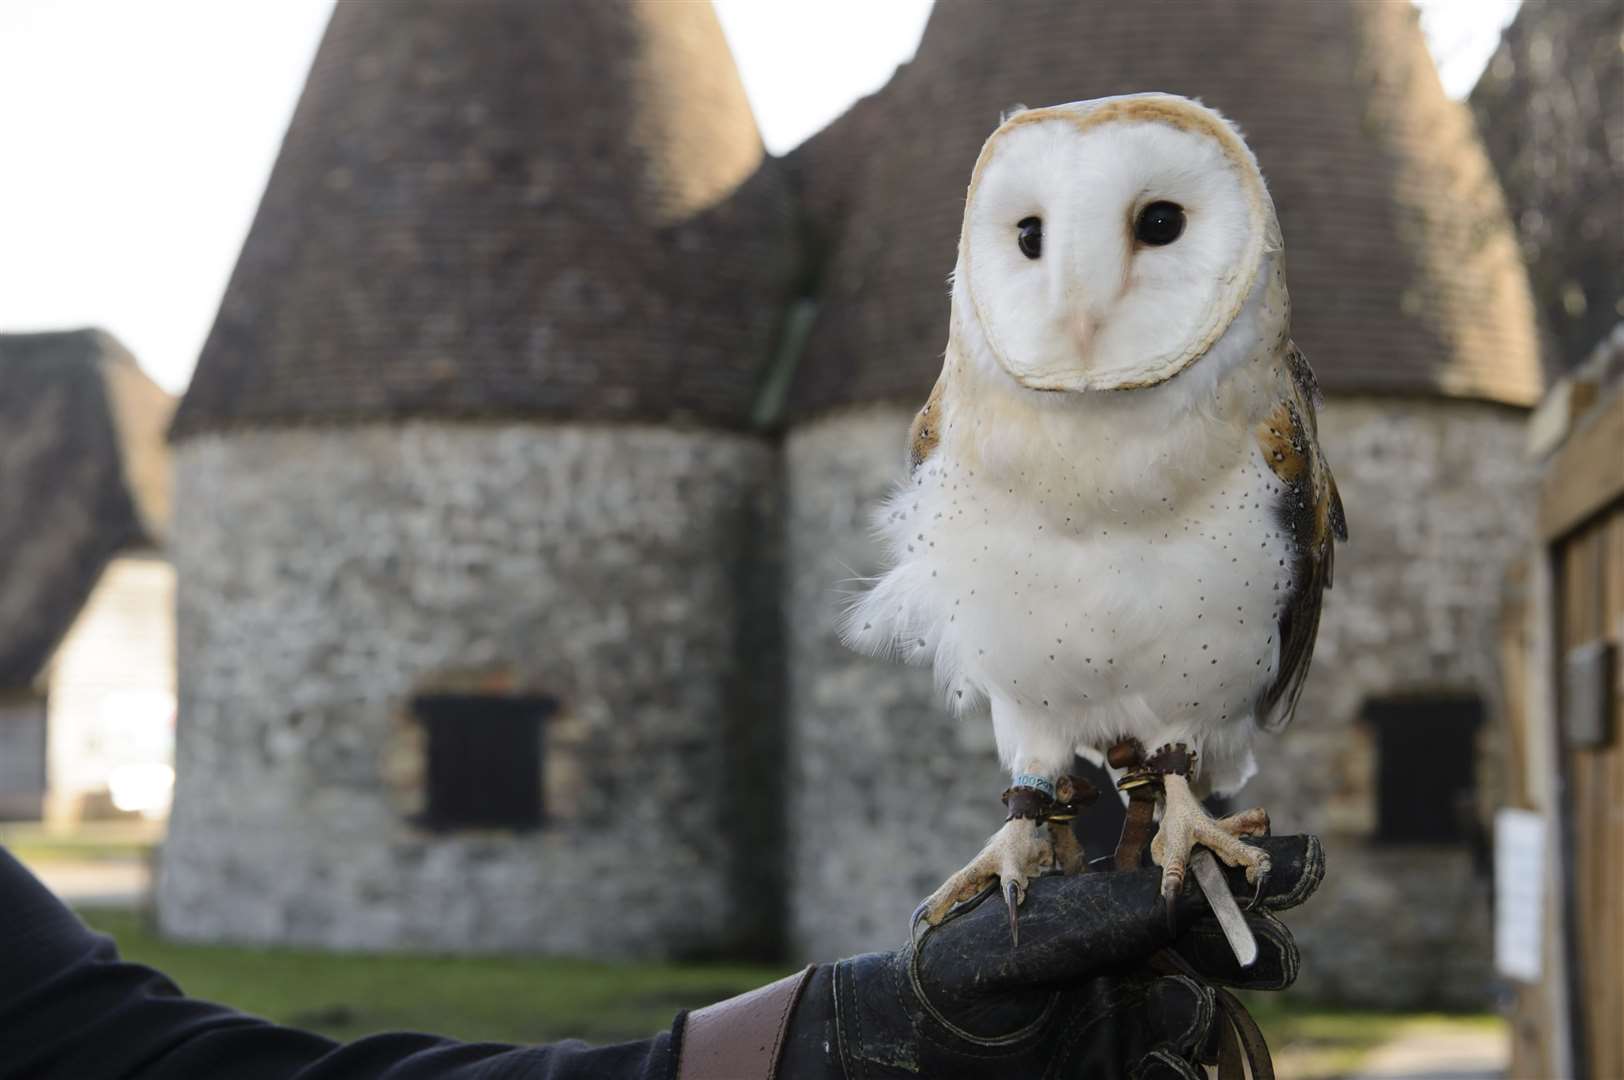 There are owls and meerjats at the site in Sandling